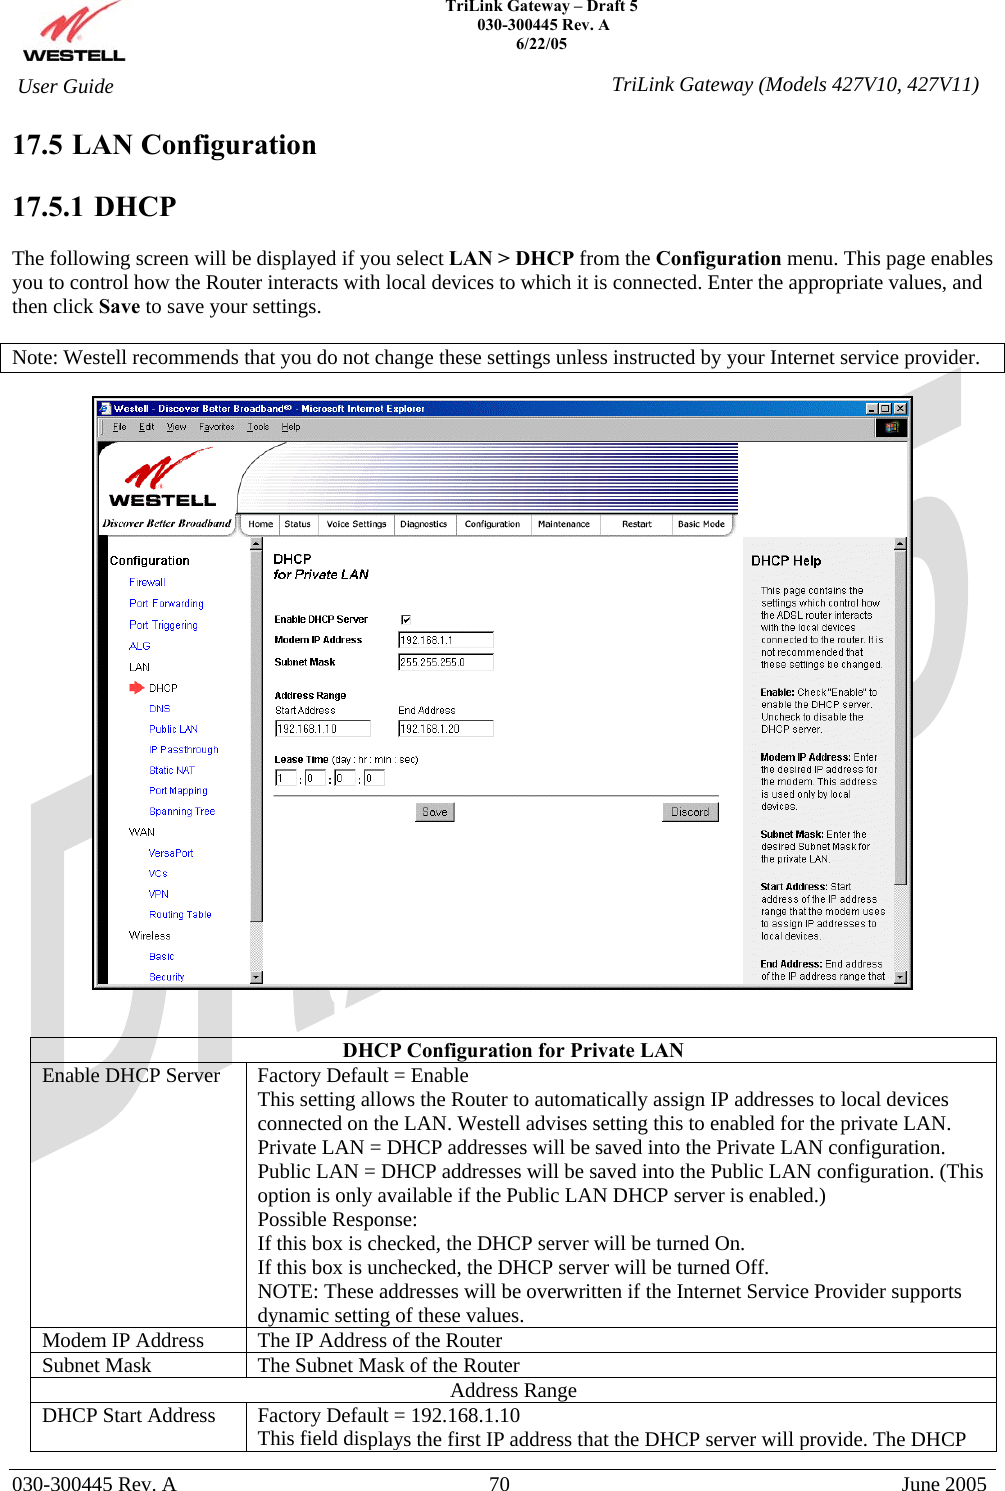    TriLink Gateway – Draft 5   030-300445 Rev. A 6/22/05   030-300445 Rev. A  70  June 2005  User Guide  TriLink Gateway (Models 427V10, 427V11)17.5 LAN Configuration  17.5.1   DHCP  The following screen will be displayed if you select LAN &gt; DHCP from the Configuration menu. This page enables you to control how the Router interacts with local devices to which it is connected. Enter the appropriate values, and then click Save to save your settings.  Note: Westell recommends that you do not change these settings unless instructed by your Internet service provider.     DHCP Configuration for Private LAN Enable DHCP Server  Factory Default = Enable This setting allows the Router to automatically assign IP addresses to local devices connected on the LAN. Westell advises setting this to enabled for the private LAN. Private LAN = DHCP addresses will be saved into the Private LAN configuration. Public LAN = DHCP addresses will be saved into the Public LAN configuration. (This option is only available if the Public LAN DHCP server is enabled.)  Possible Response: If this box is checked, the DHCP server will be turned On. If this box is unchecked, the DHCP server will be turned Off. NOTE: These addresses will be overwritten if the Internet Service Provider supports dynamic setting of these values. Modem IP Address  The IP Address of the Router Subnet Mask  The Subnet Mask of the Router Address Range DHCP Start Address  Factory Default = 192.168.1.10 This field displays the first IP address that the DHCP server will provide. The DHCP 